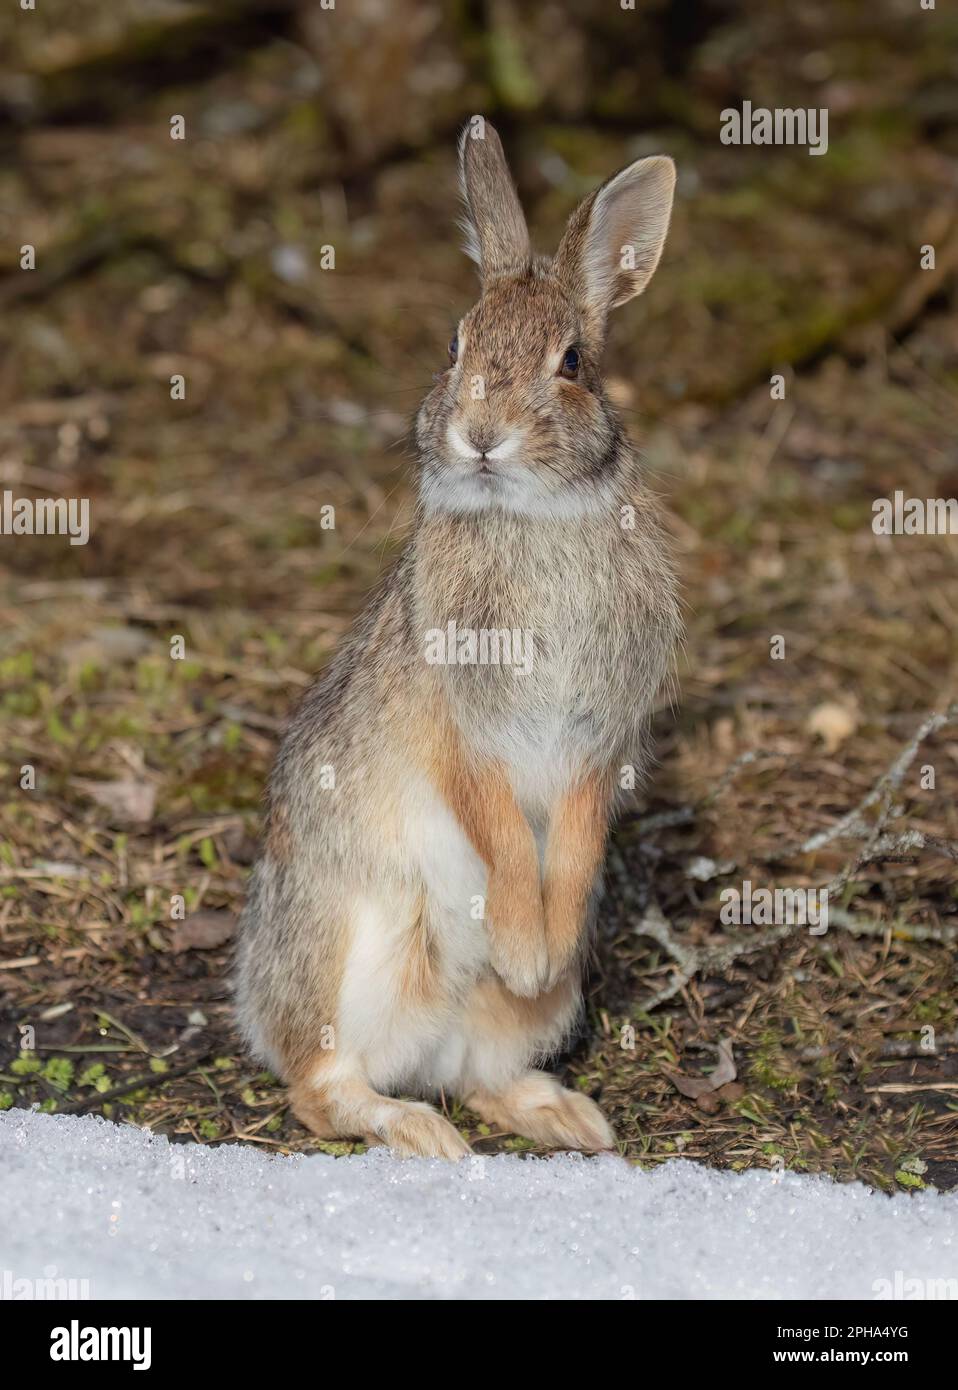 Eastern cottontail rabbit standing on its hind legs in a winter forest. Stock Photo